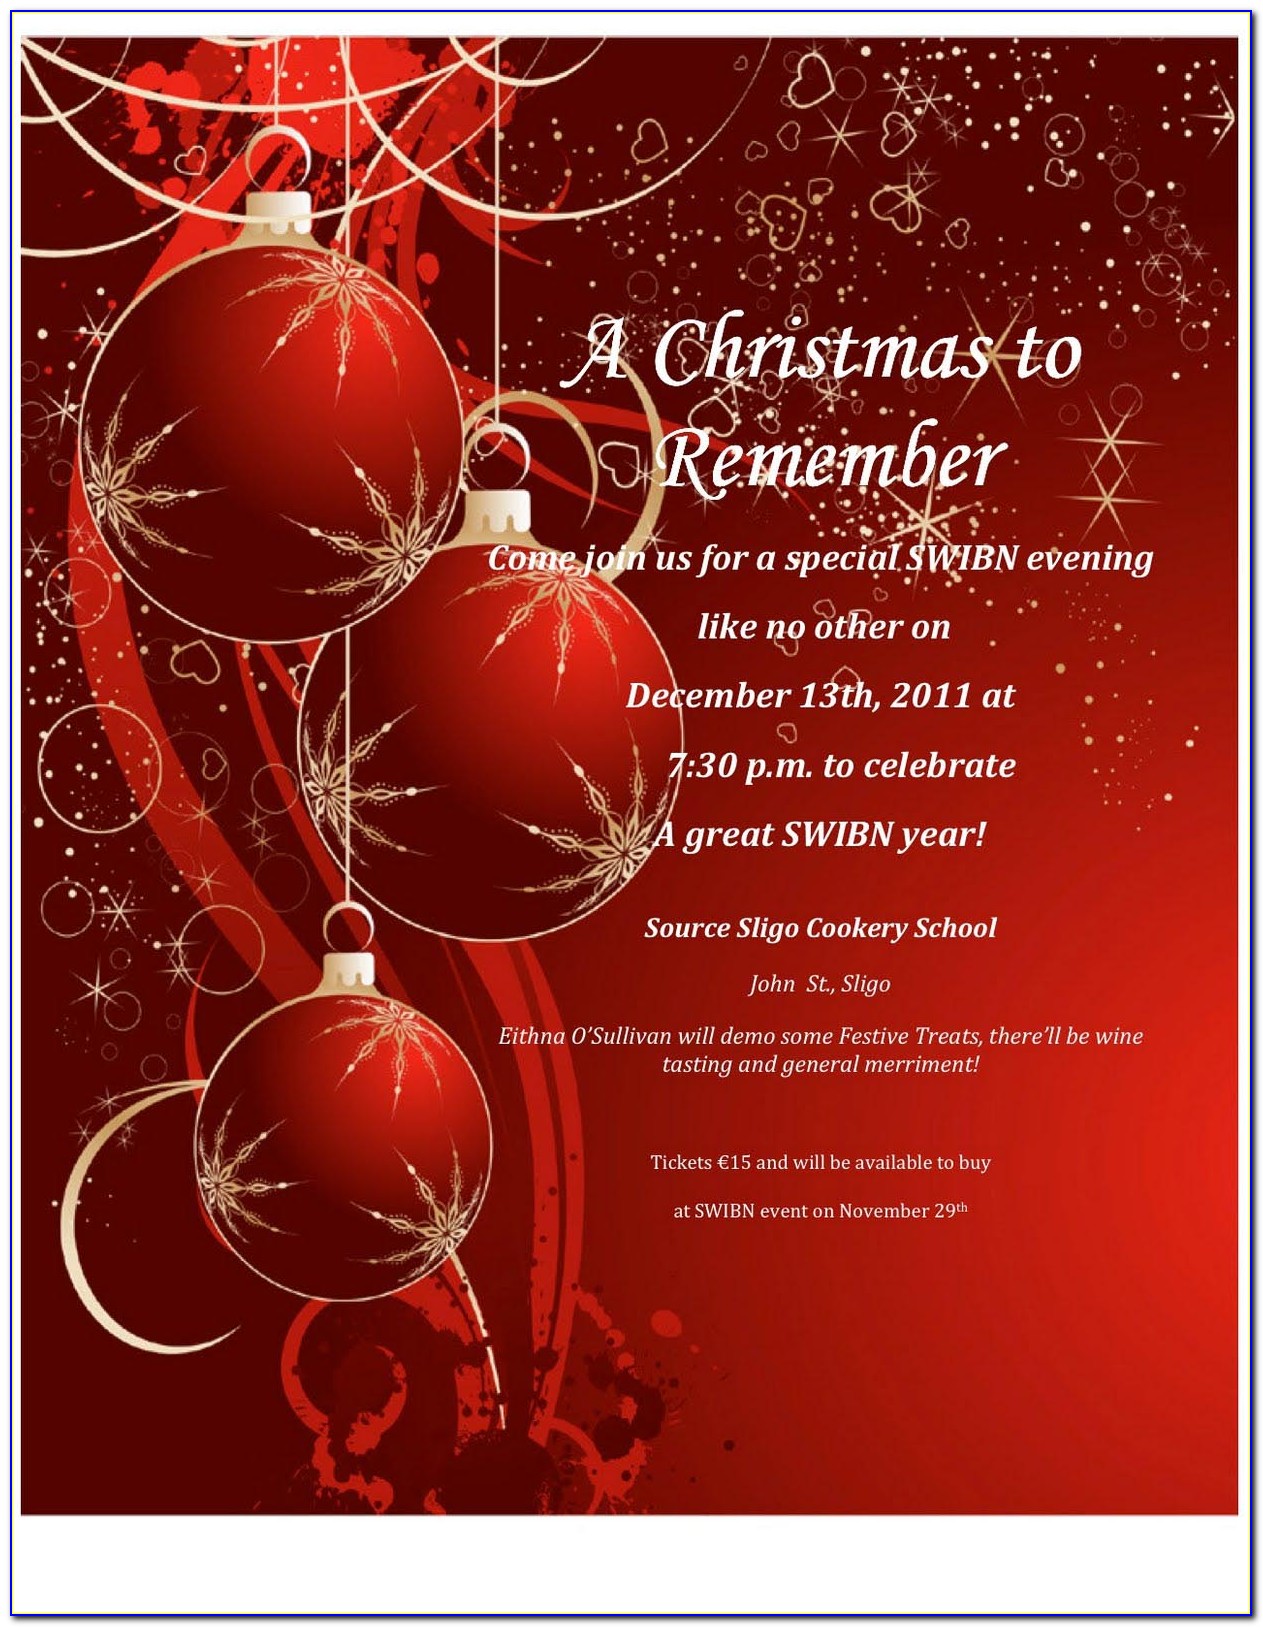 Christmas Flyer Psd Templates Free Download